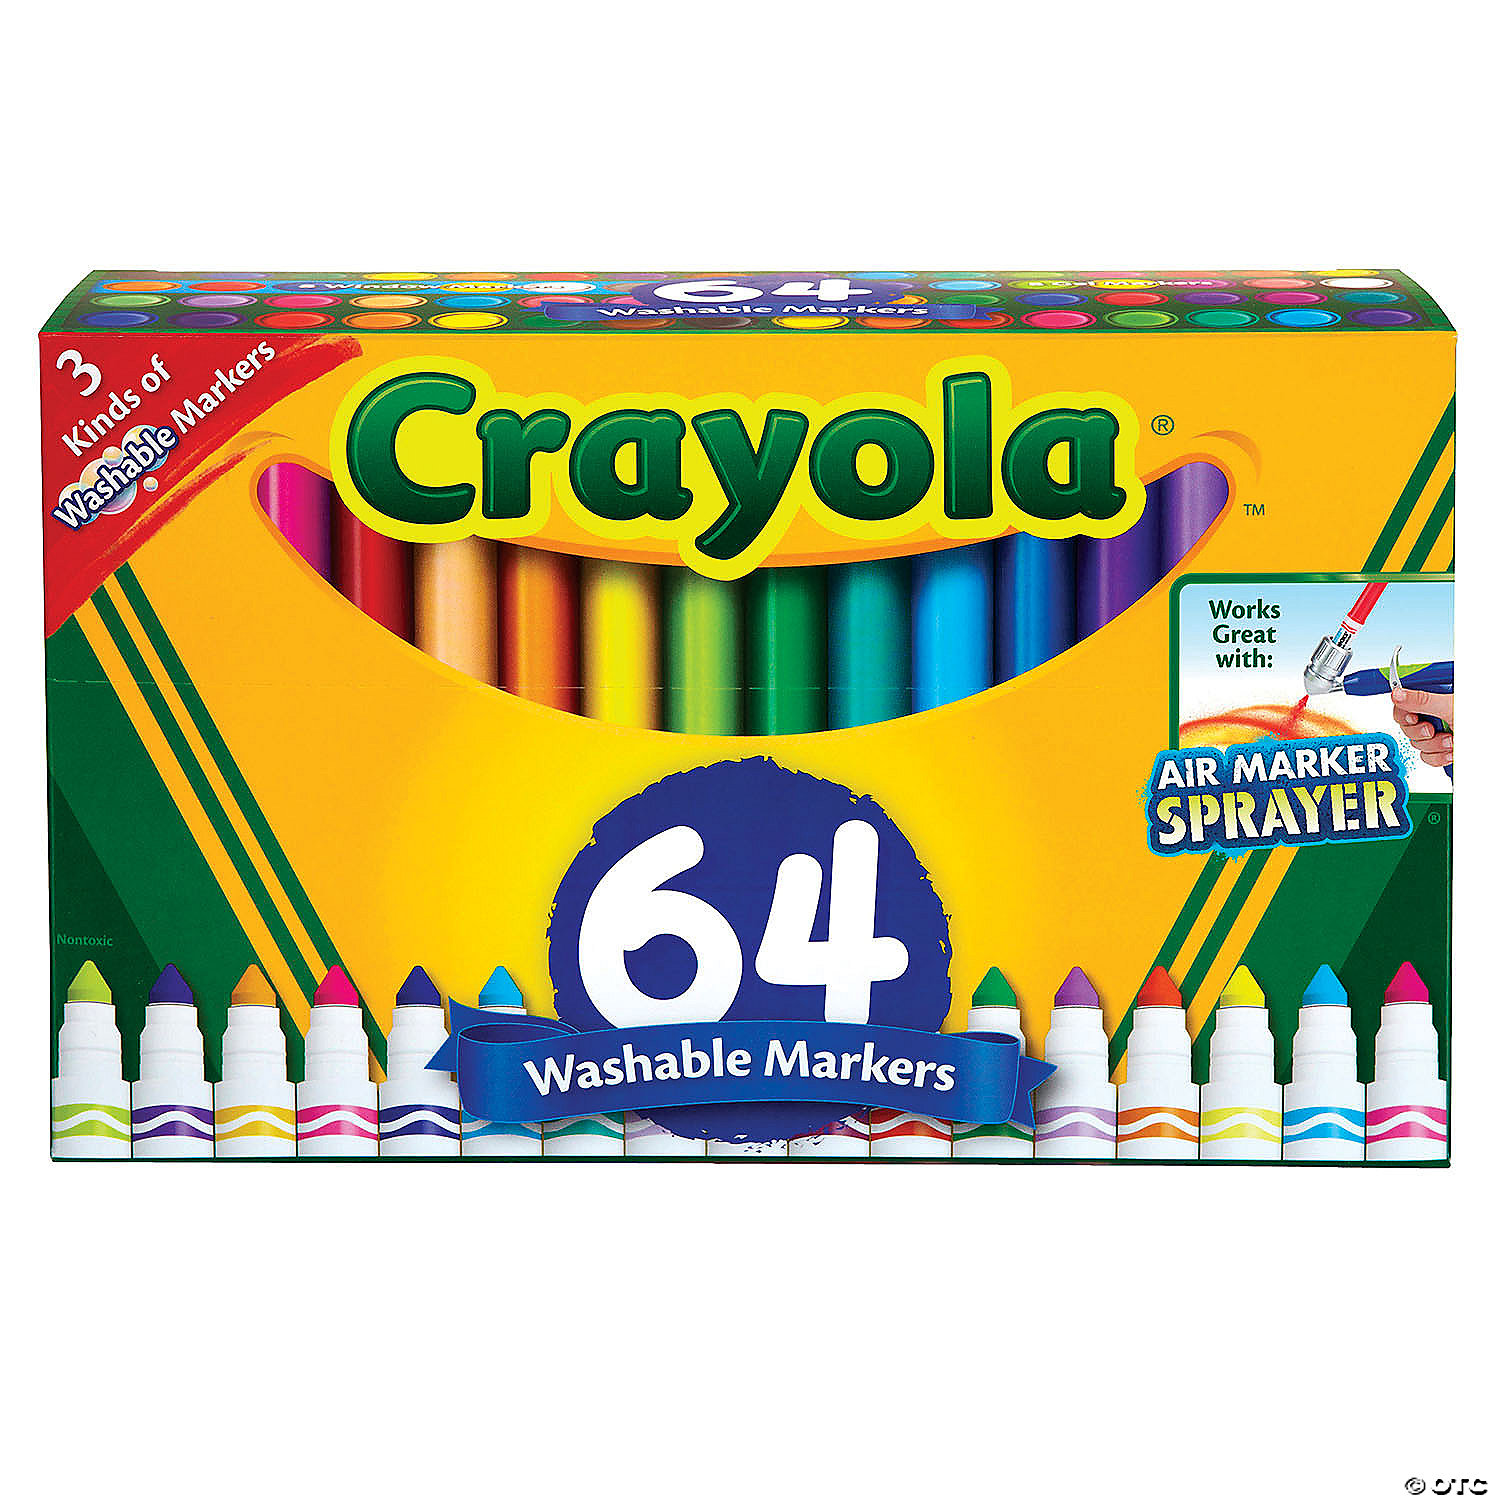 Disciplinair Verplicht Premisse Crayola Washable Markers, Broad Line, Assorted Colors, Pack of 64 |  Oriental Trading